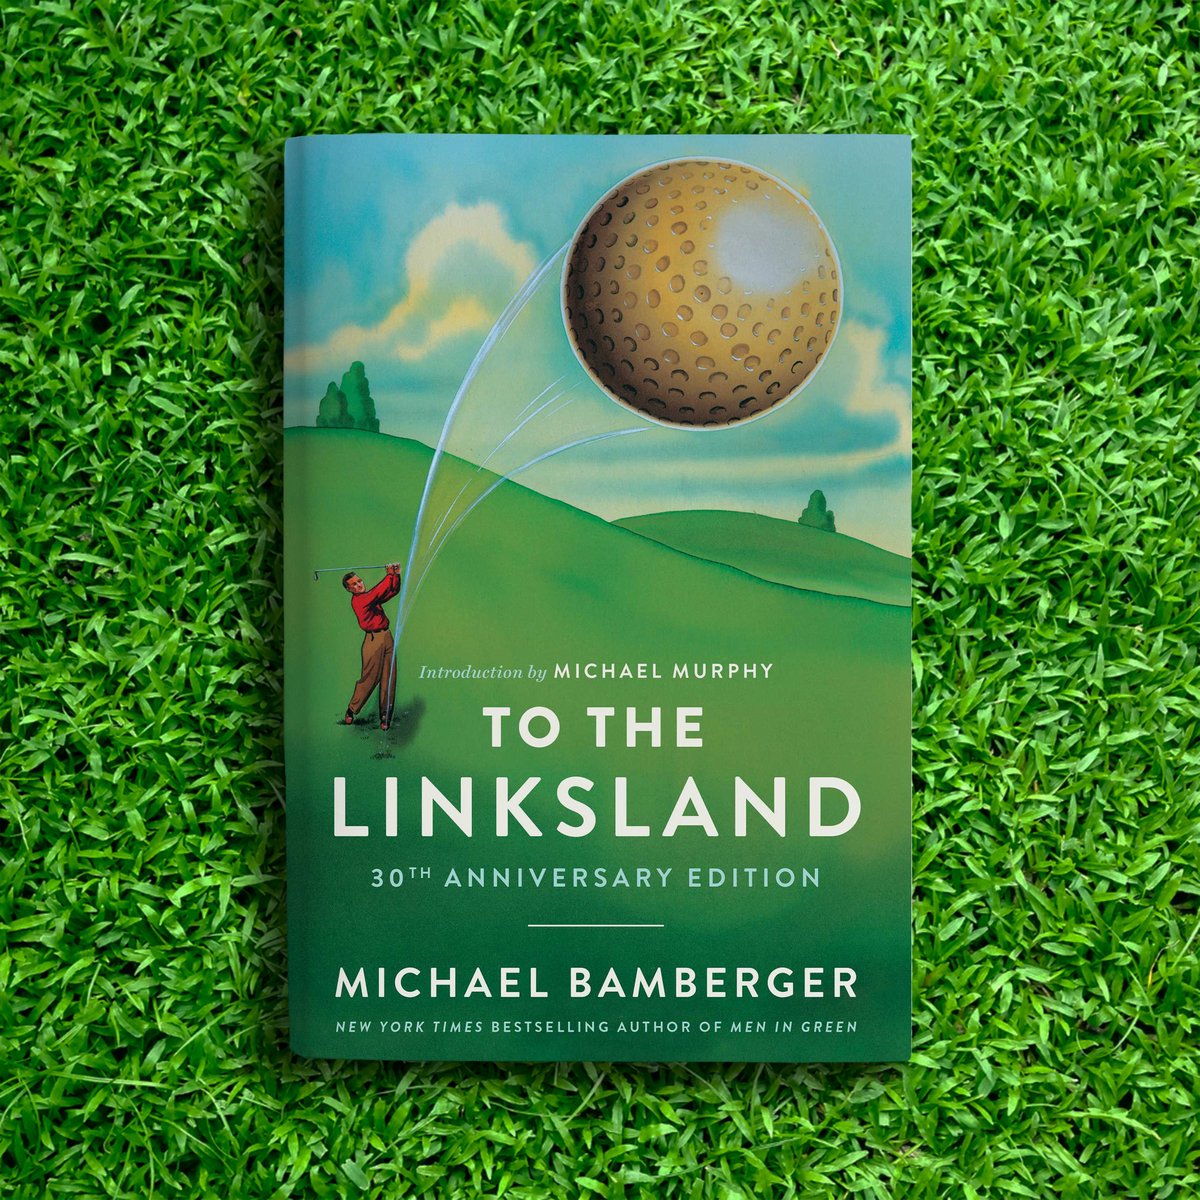 Thrilled to share that TO THE LINKSLAND has been featured in @WSJ! For more on this beloved golf adventure, see here: 🏌️ spr.ly/6016wQWJA